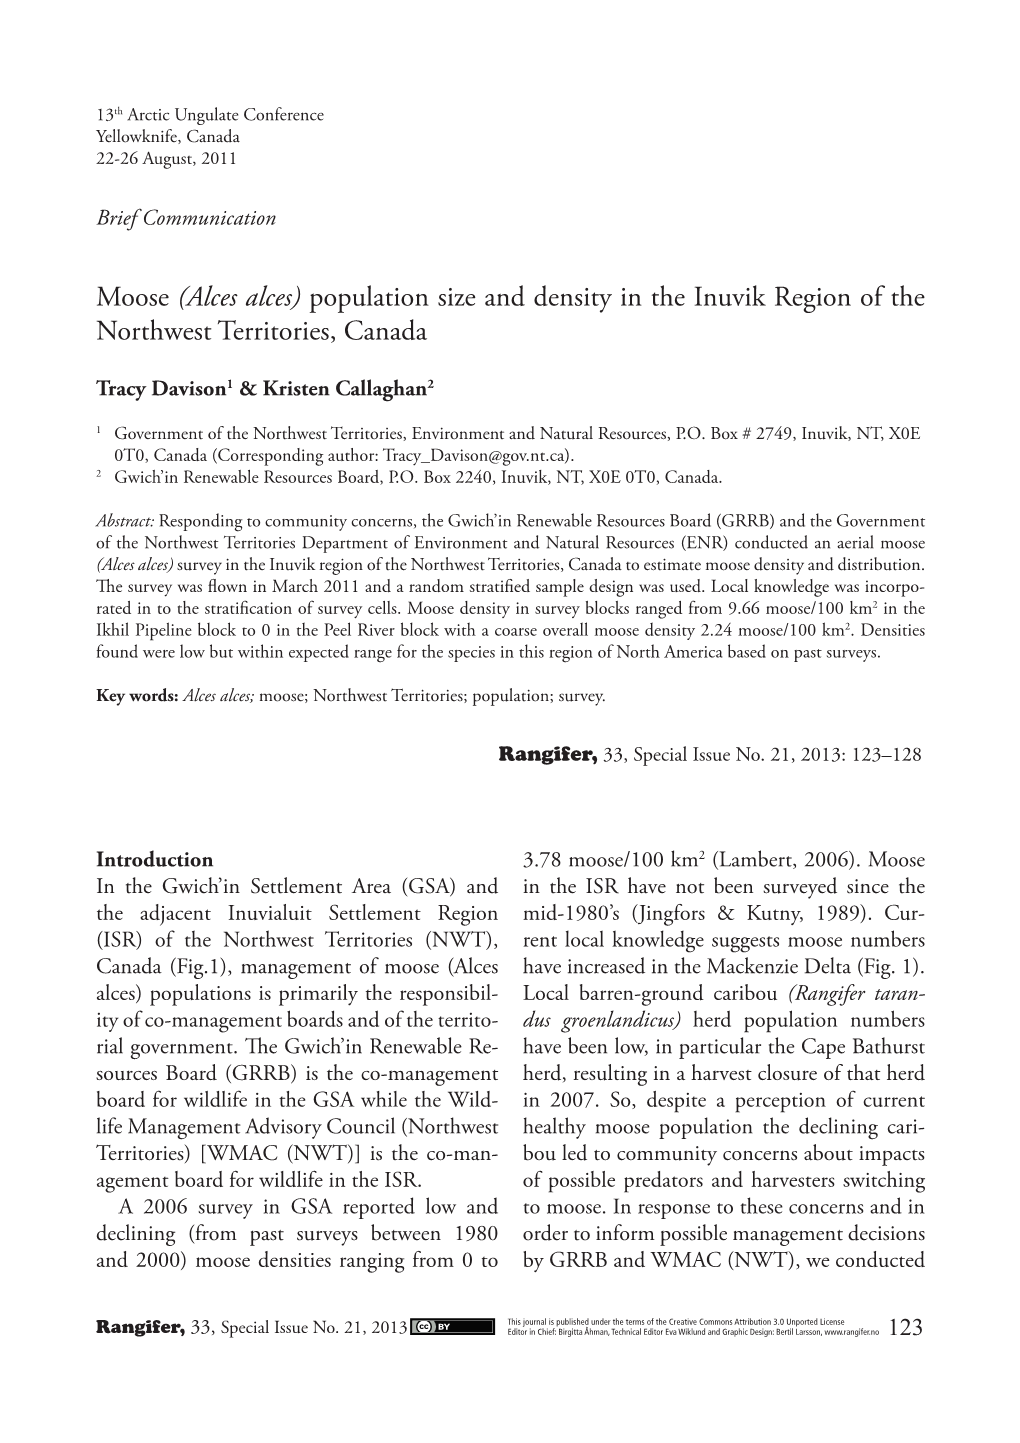 Moose (Alces Alces) Population Size and Density in the Inuvik Region of the Northwest Territories, Canada